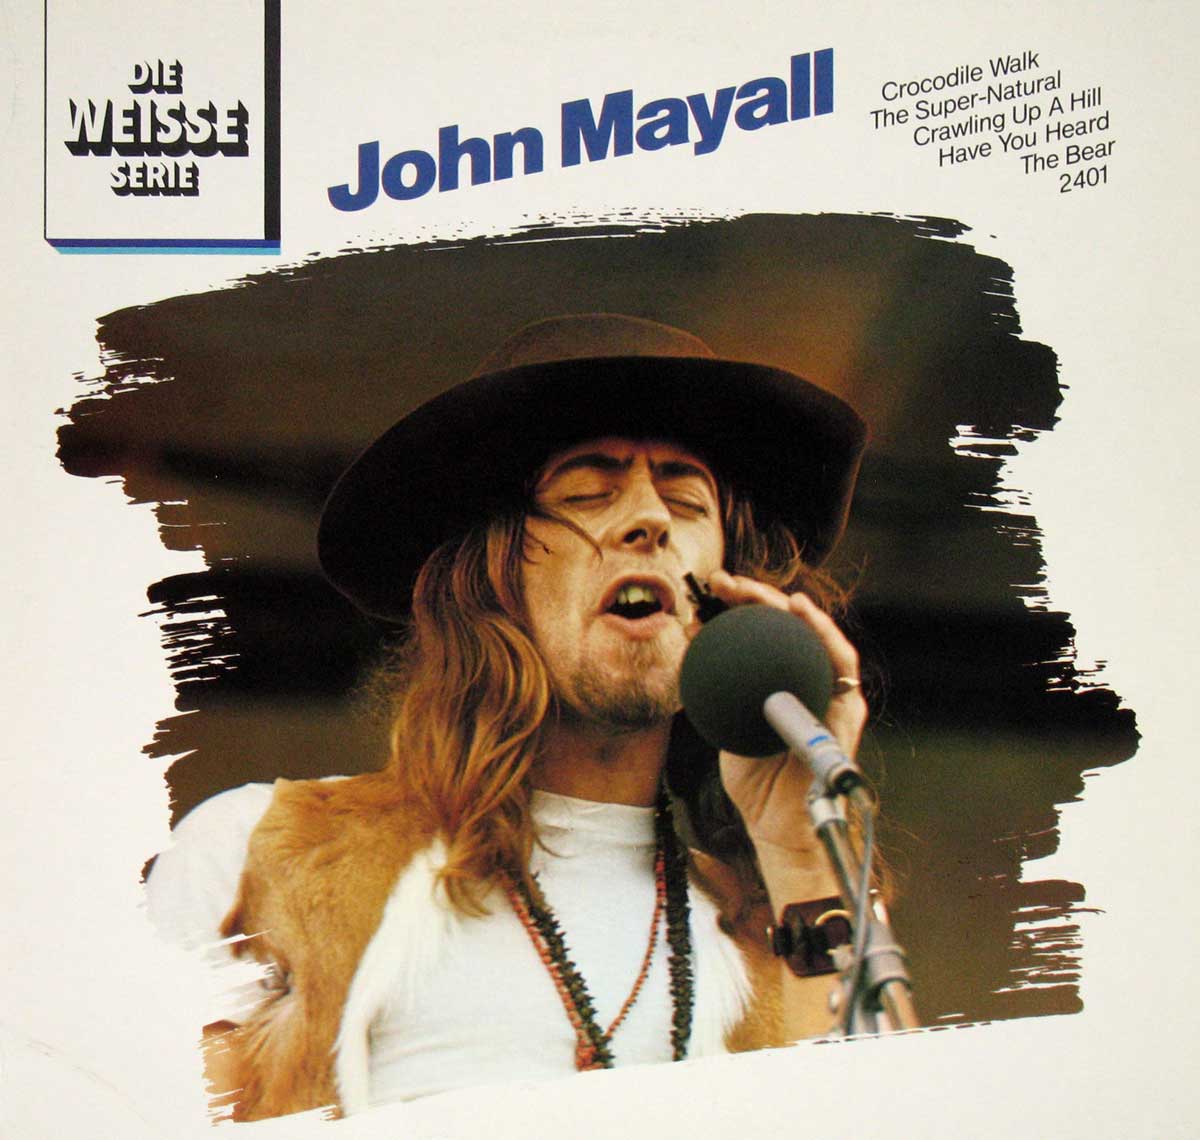 Album Front Cover Photo of John Mayall - Self-Titled Die Weisse Serie White Series 